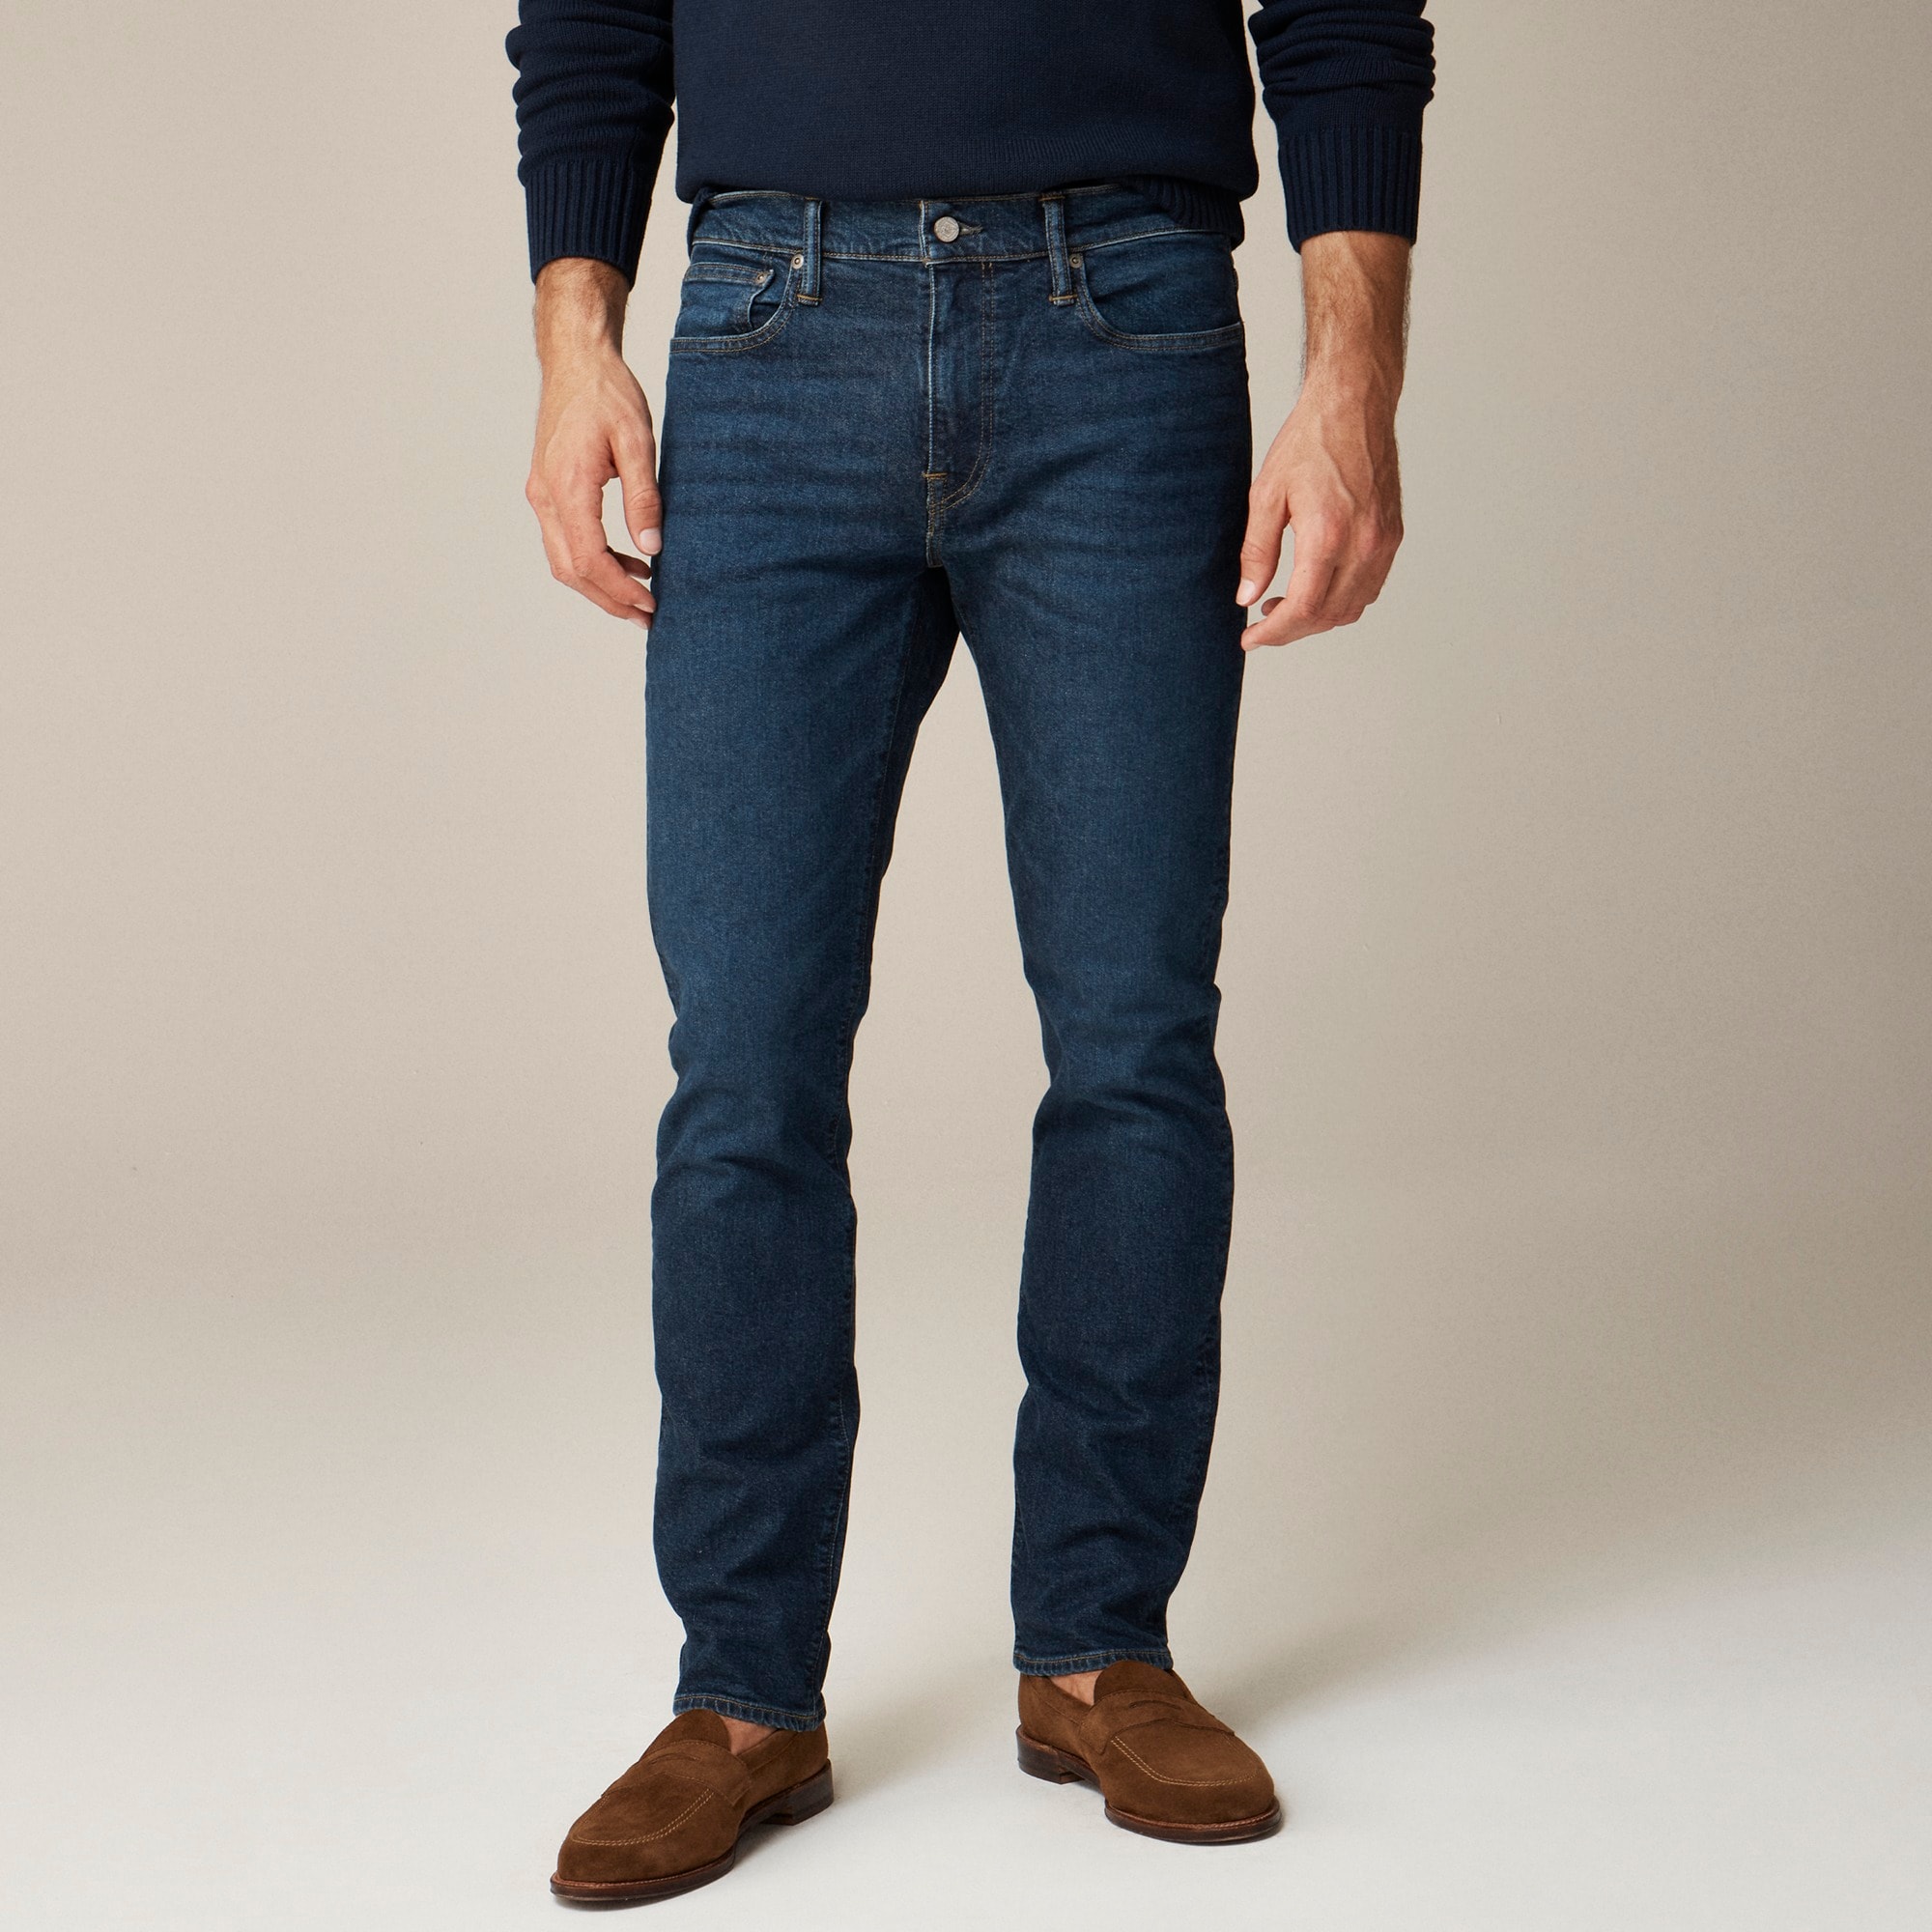  770™ Straight-fit stretch jean in one-year wash